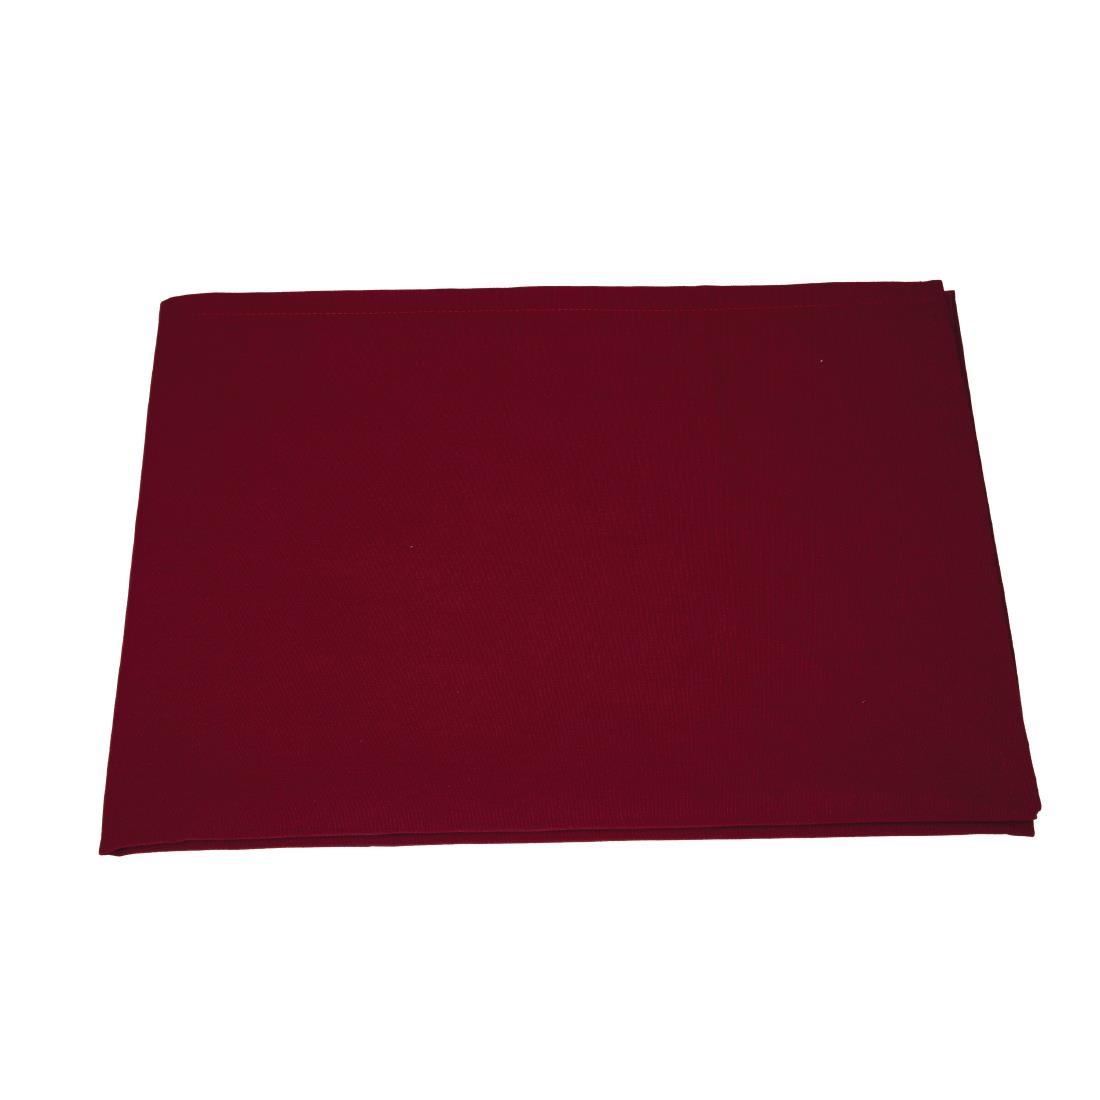 Occasions Tablecloth Burgundy 1780 x 2750mm - HB569  - 4